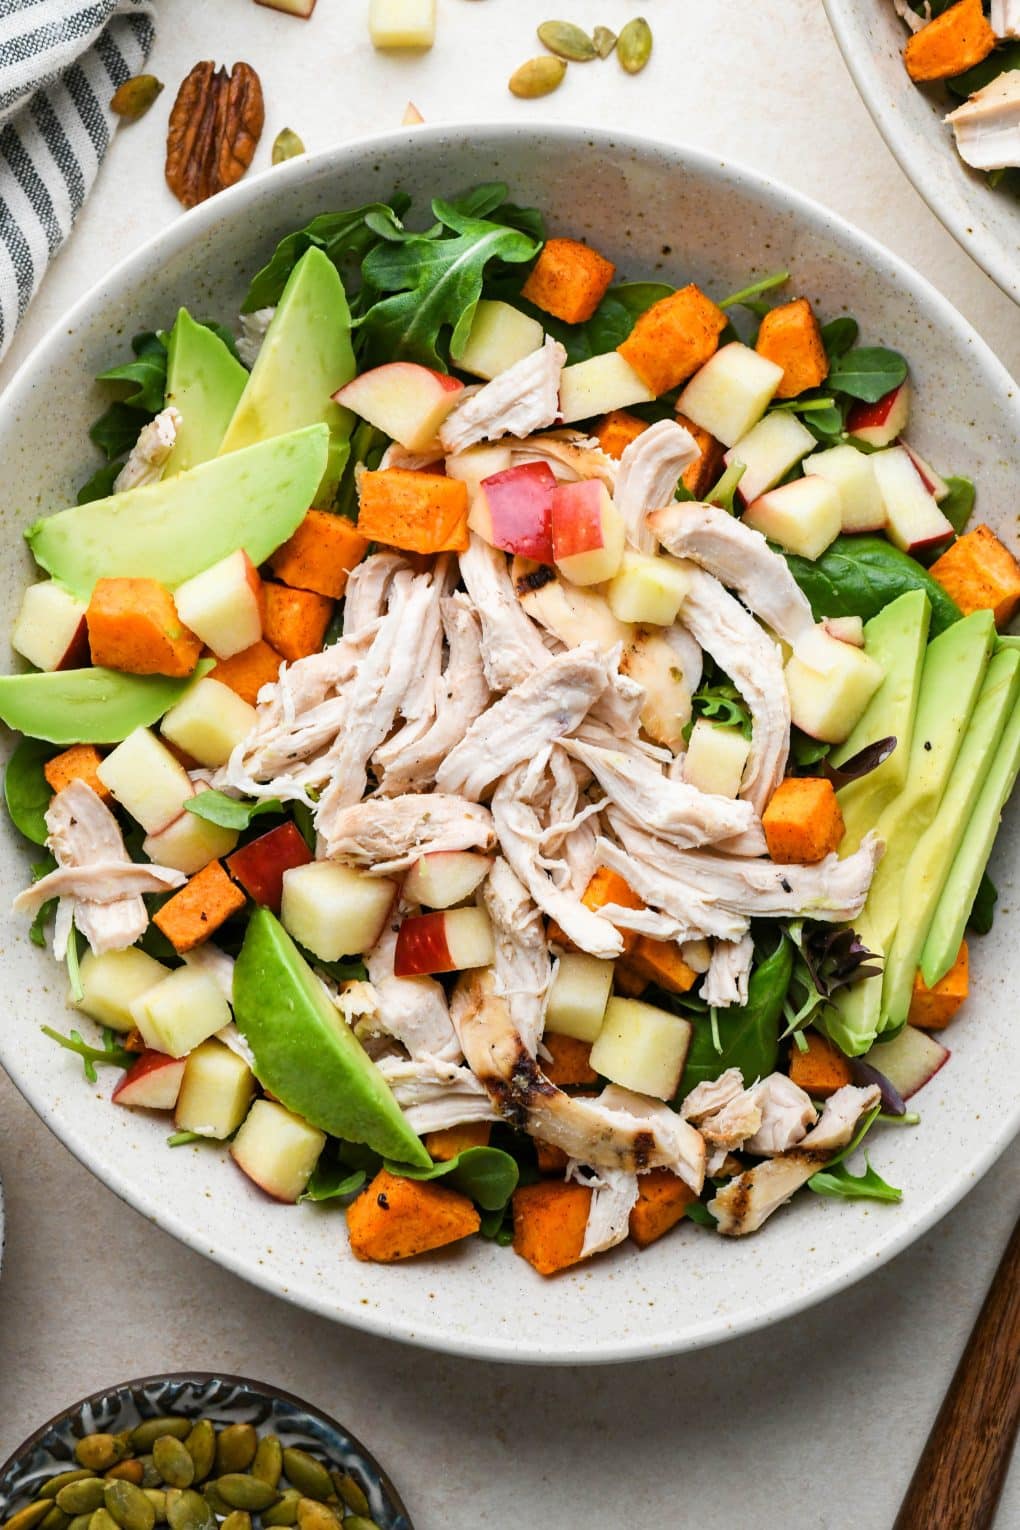 How to make Winter Chicken Salad: Salad ingredients assembled in a bowl before adding dressing, nuts, and seeds.